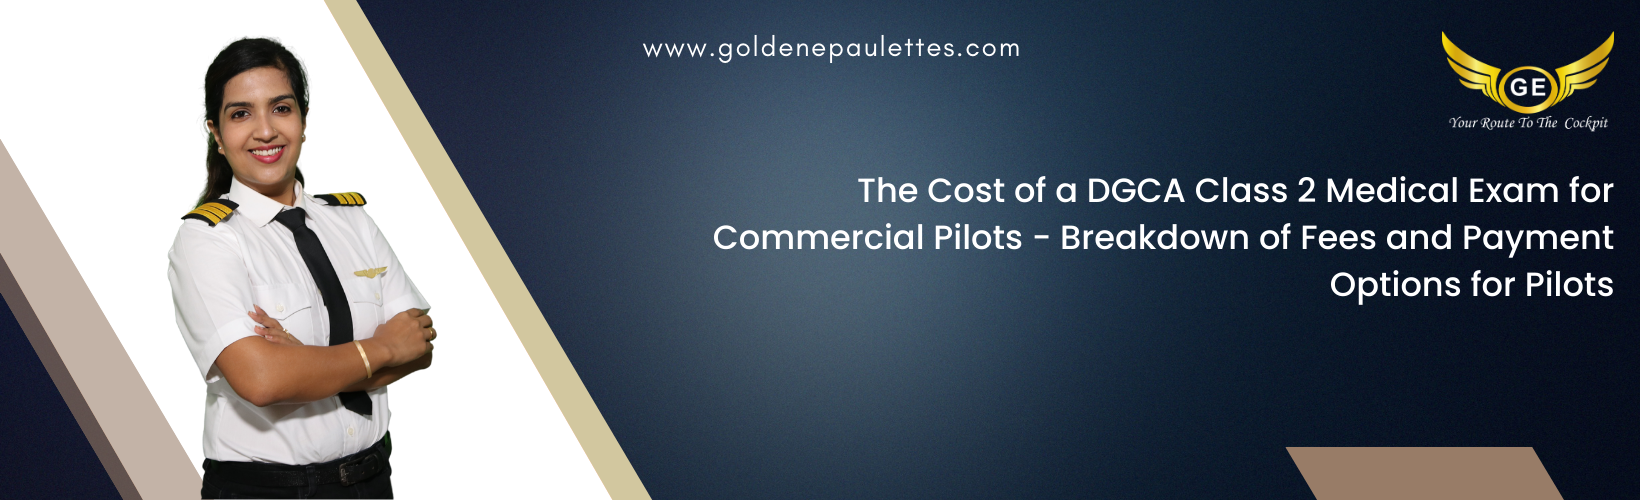 The Cost of a DGCA Class 2 Medical Exam for Commercial Pilots - This article will discuss the cost associated with the DGCA Class 2 Medical Exam for Commercial Pilots. It will also discuss the different payment options available to pilots. (Reference